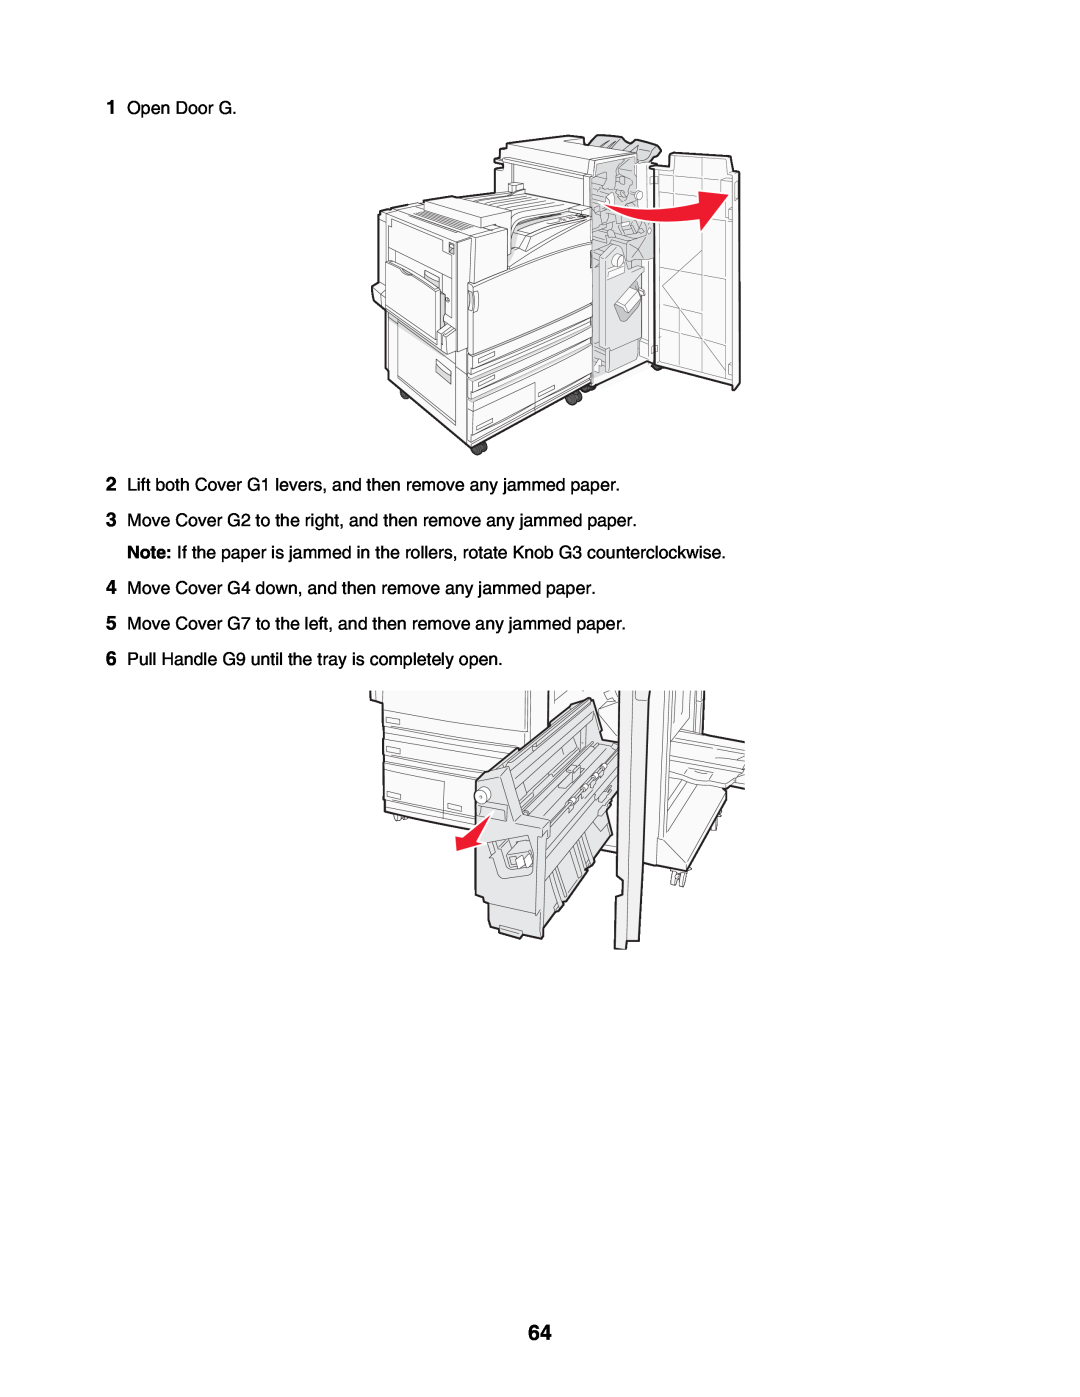 Lexmark C935 manual Open Door G, Lift both Cover G1 levers, and then remove any jammed paper 